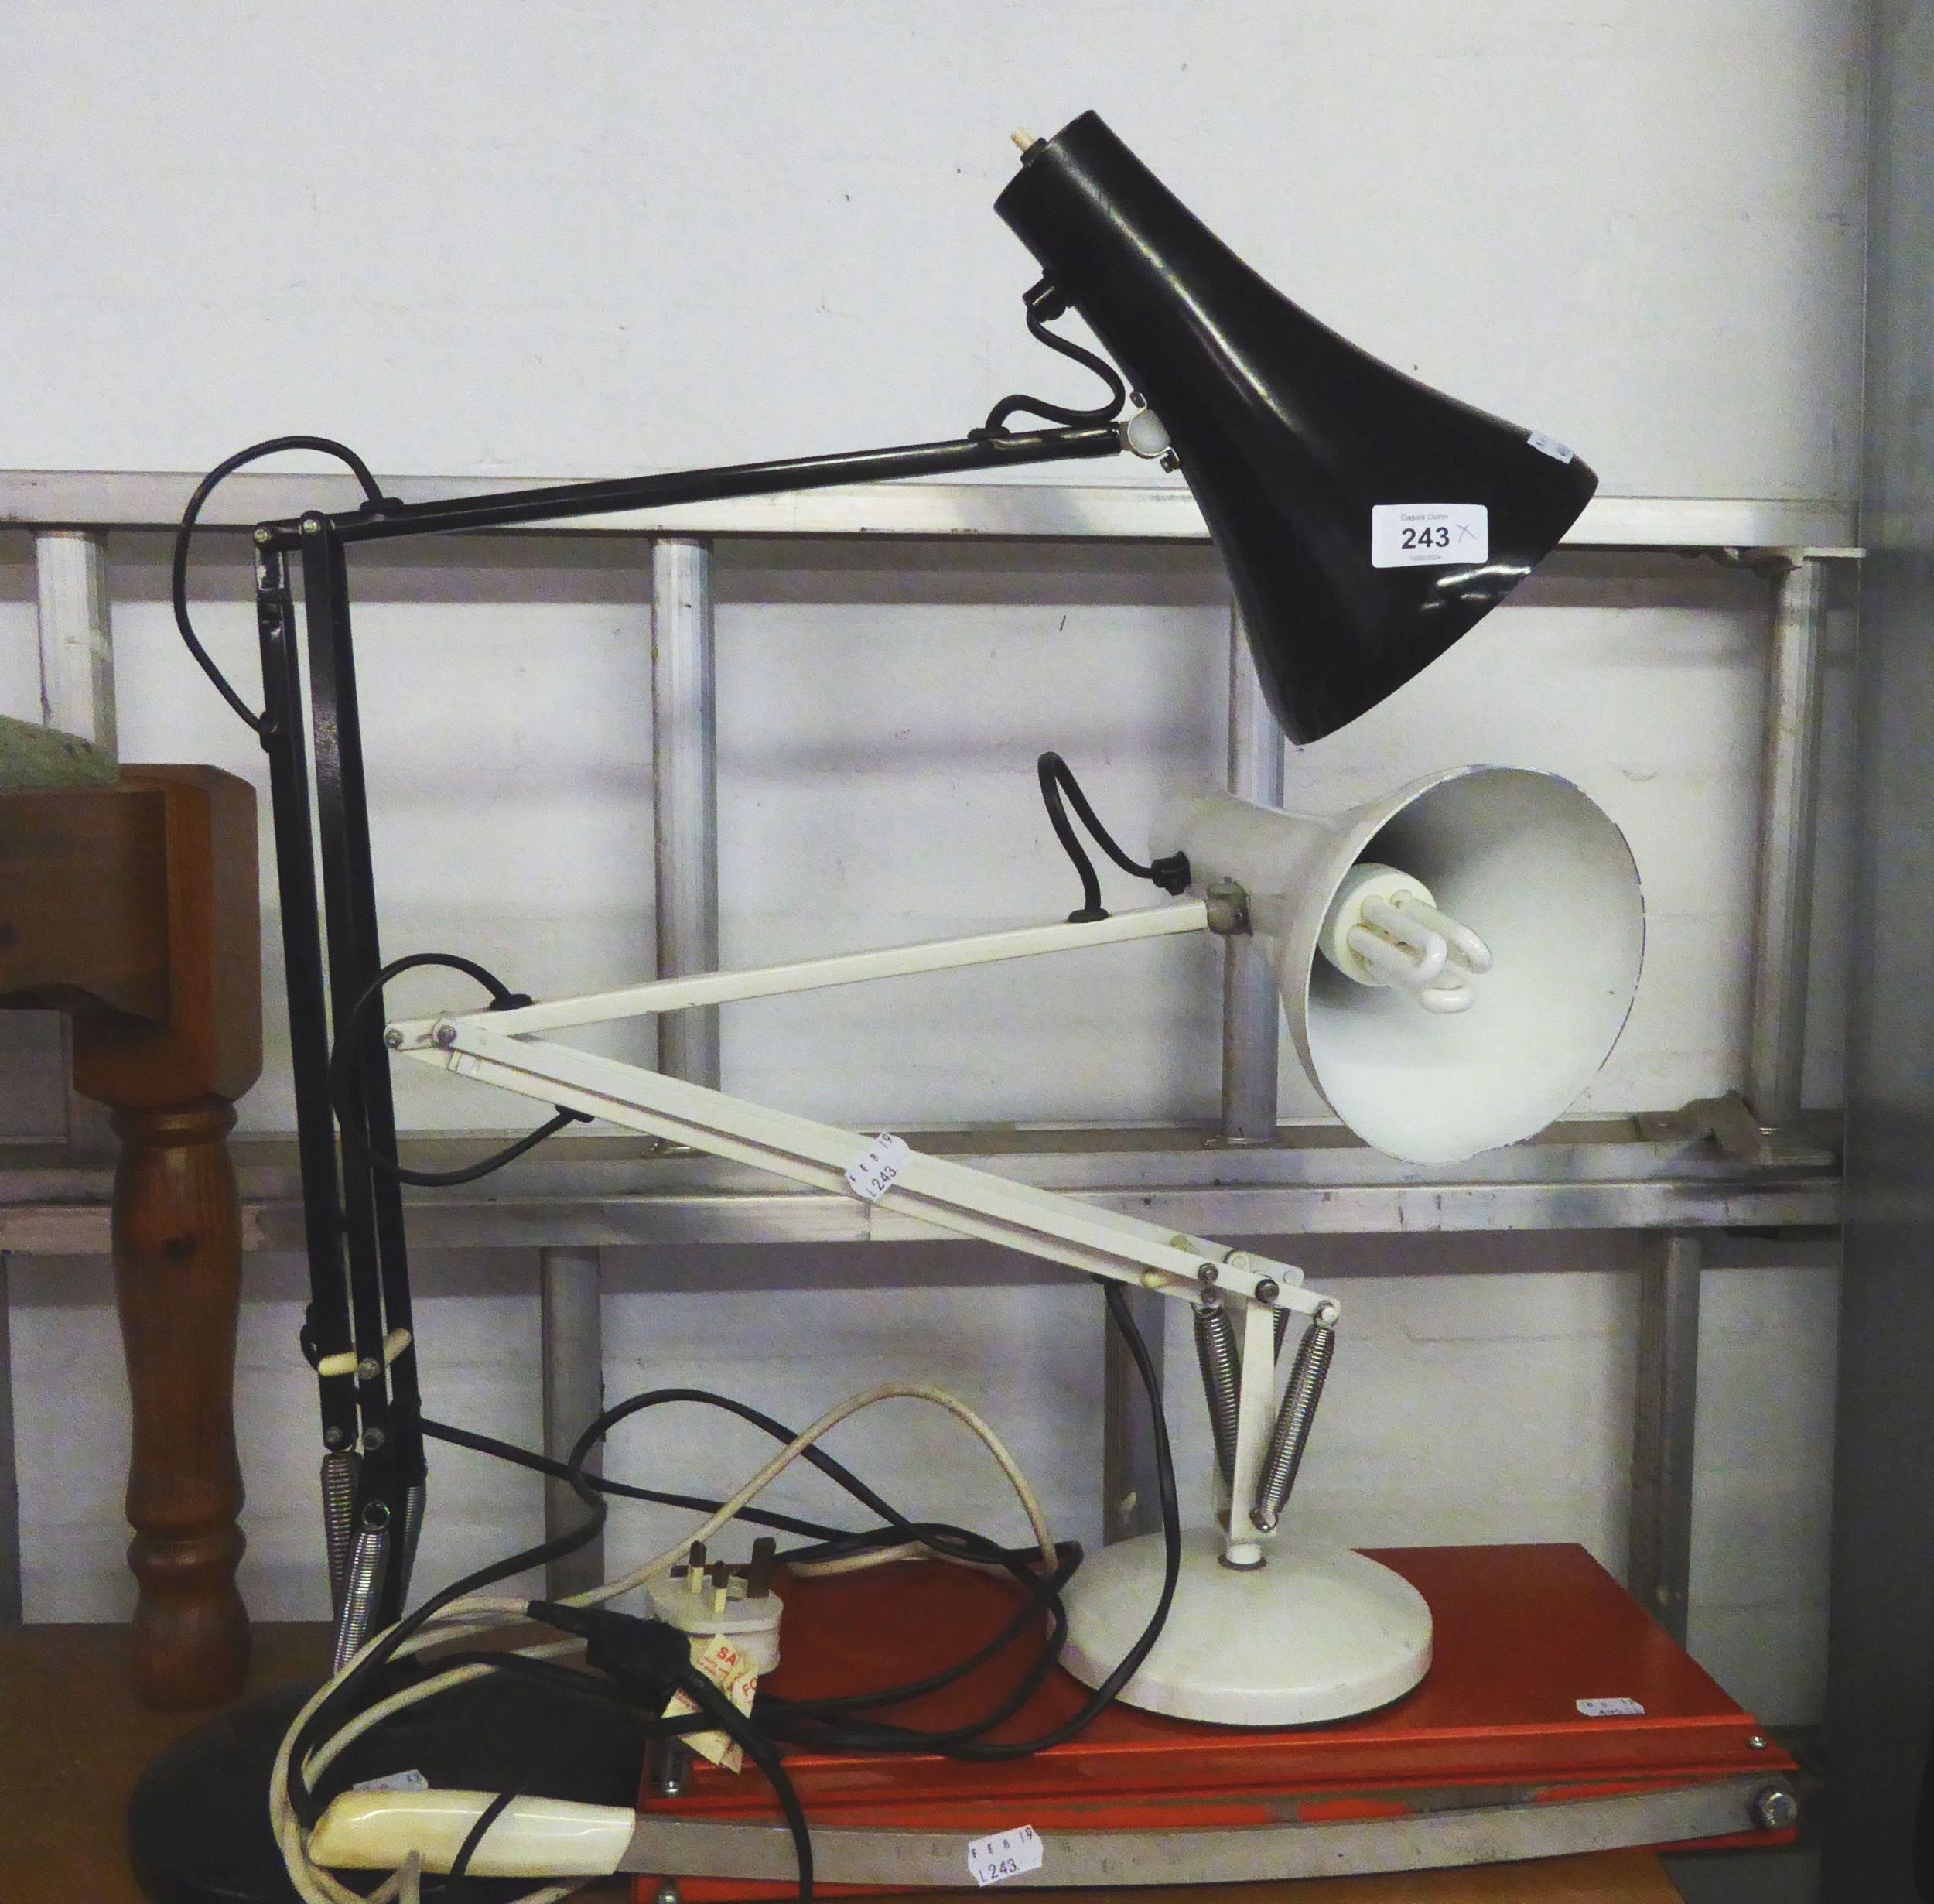 BLACK ANGLEPOISE LAMP, A WHITE ANGLEPOISE LAMP, A CHROME SHOE RACK AND A VINTAGE PAPER